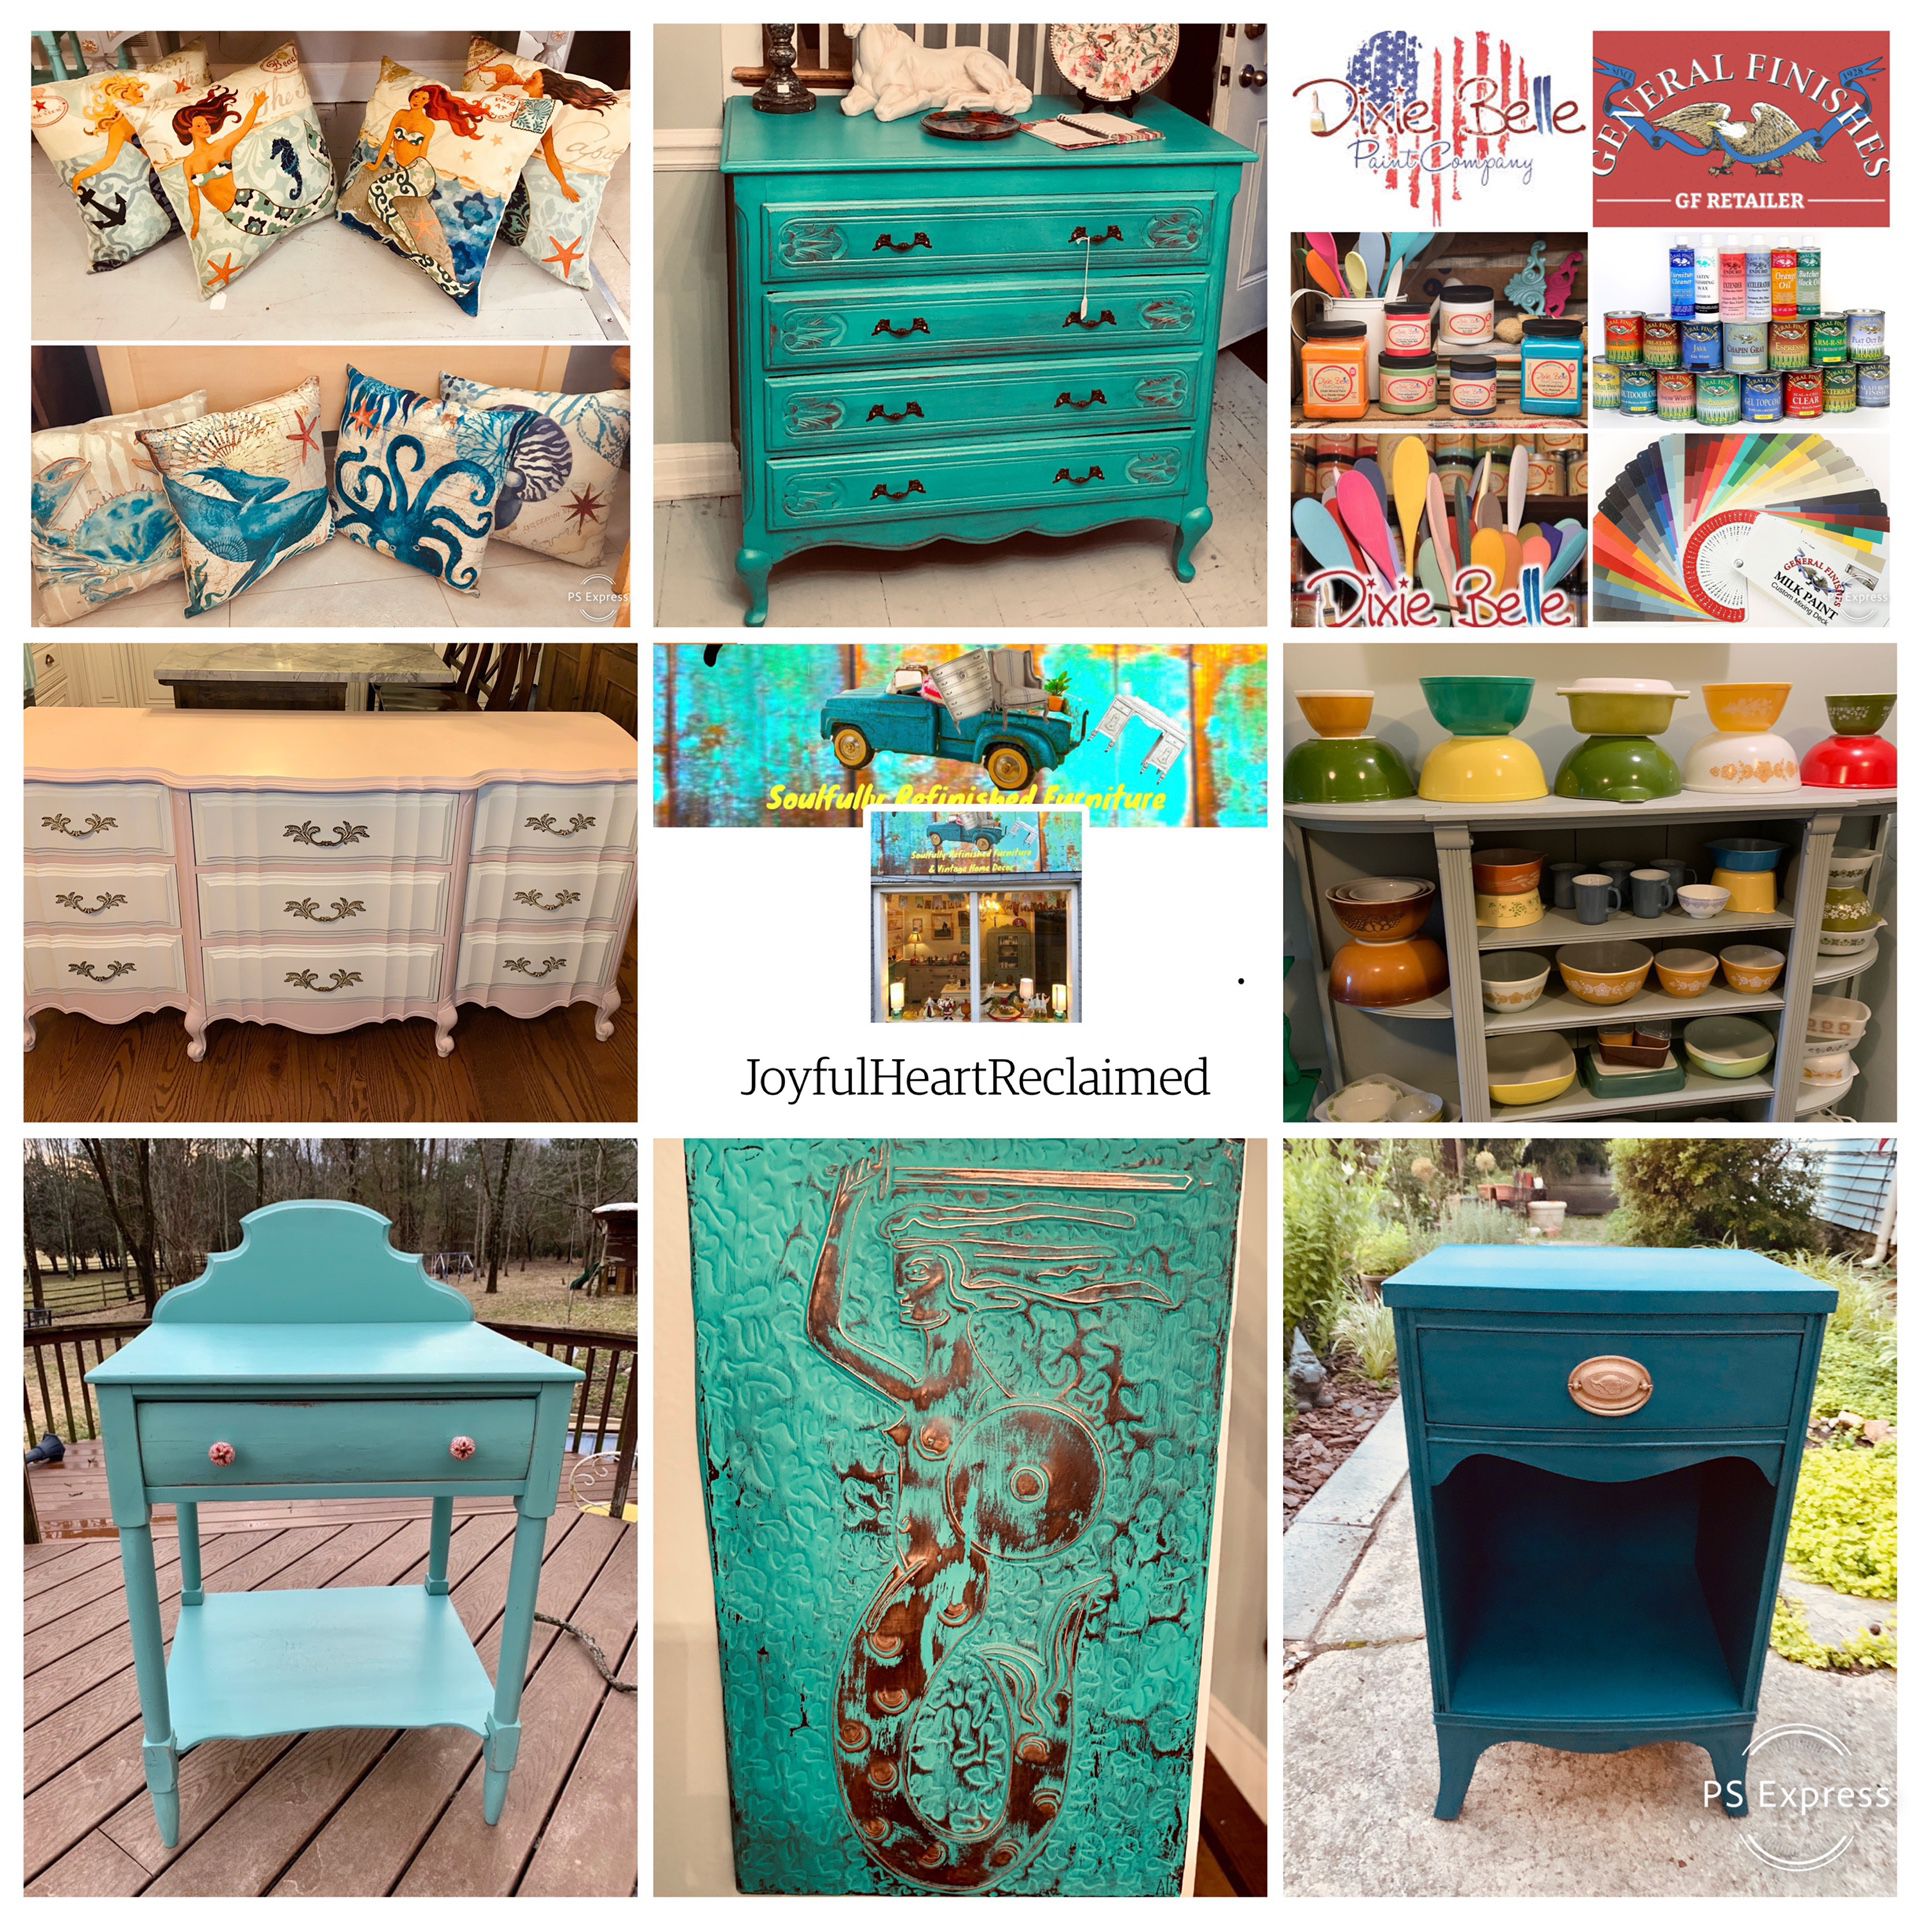 Eclectic vintage retro upcycled home decor furniture sale